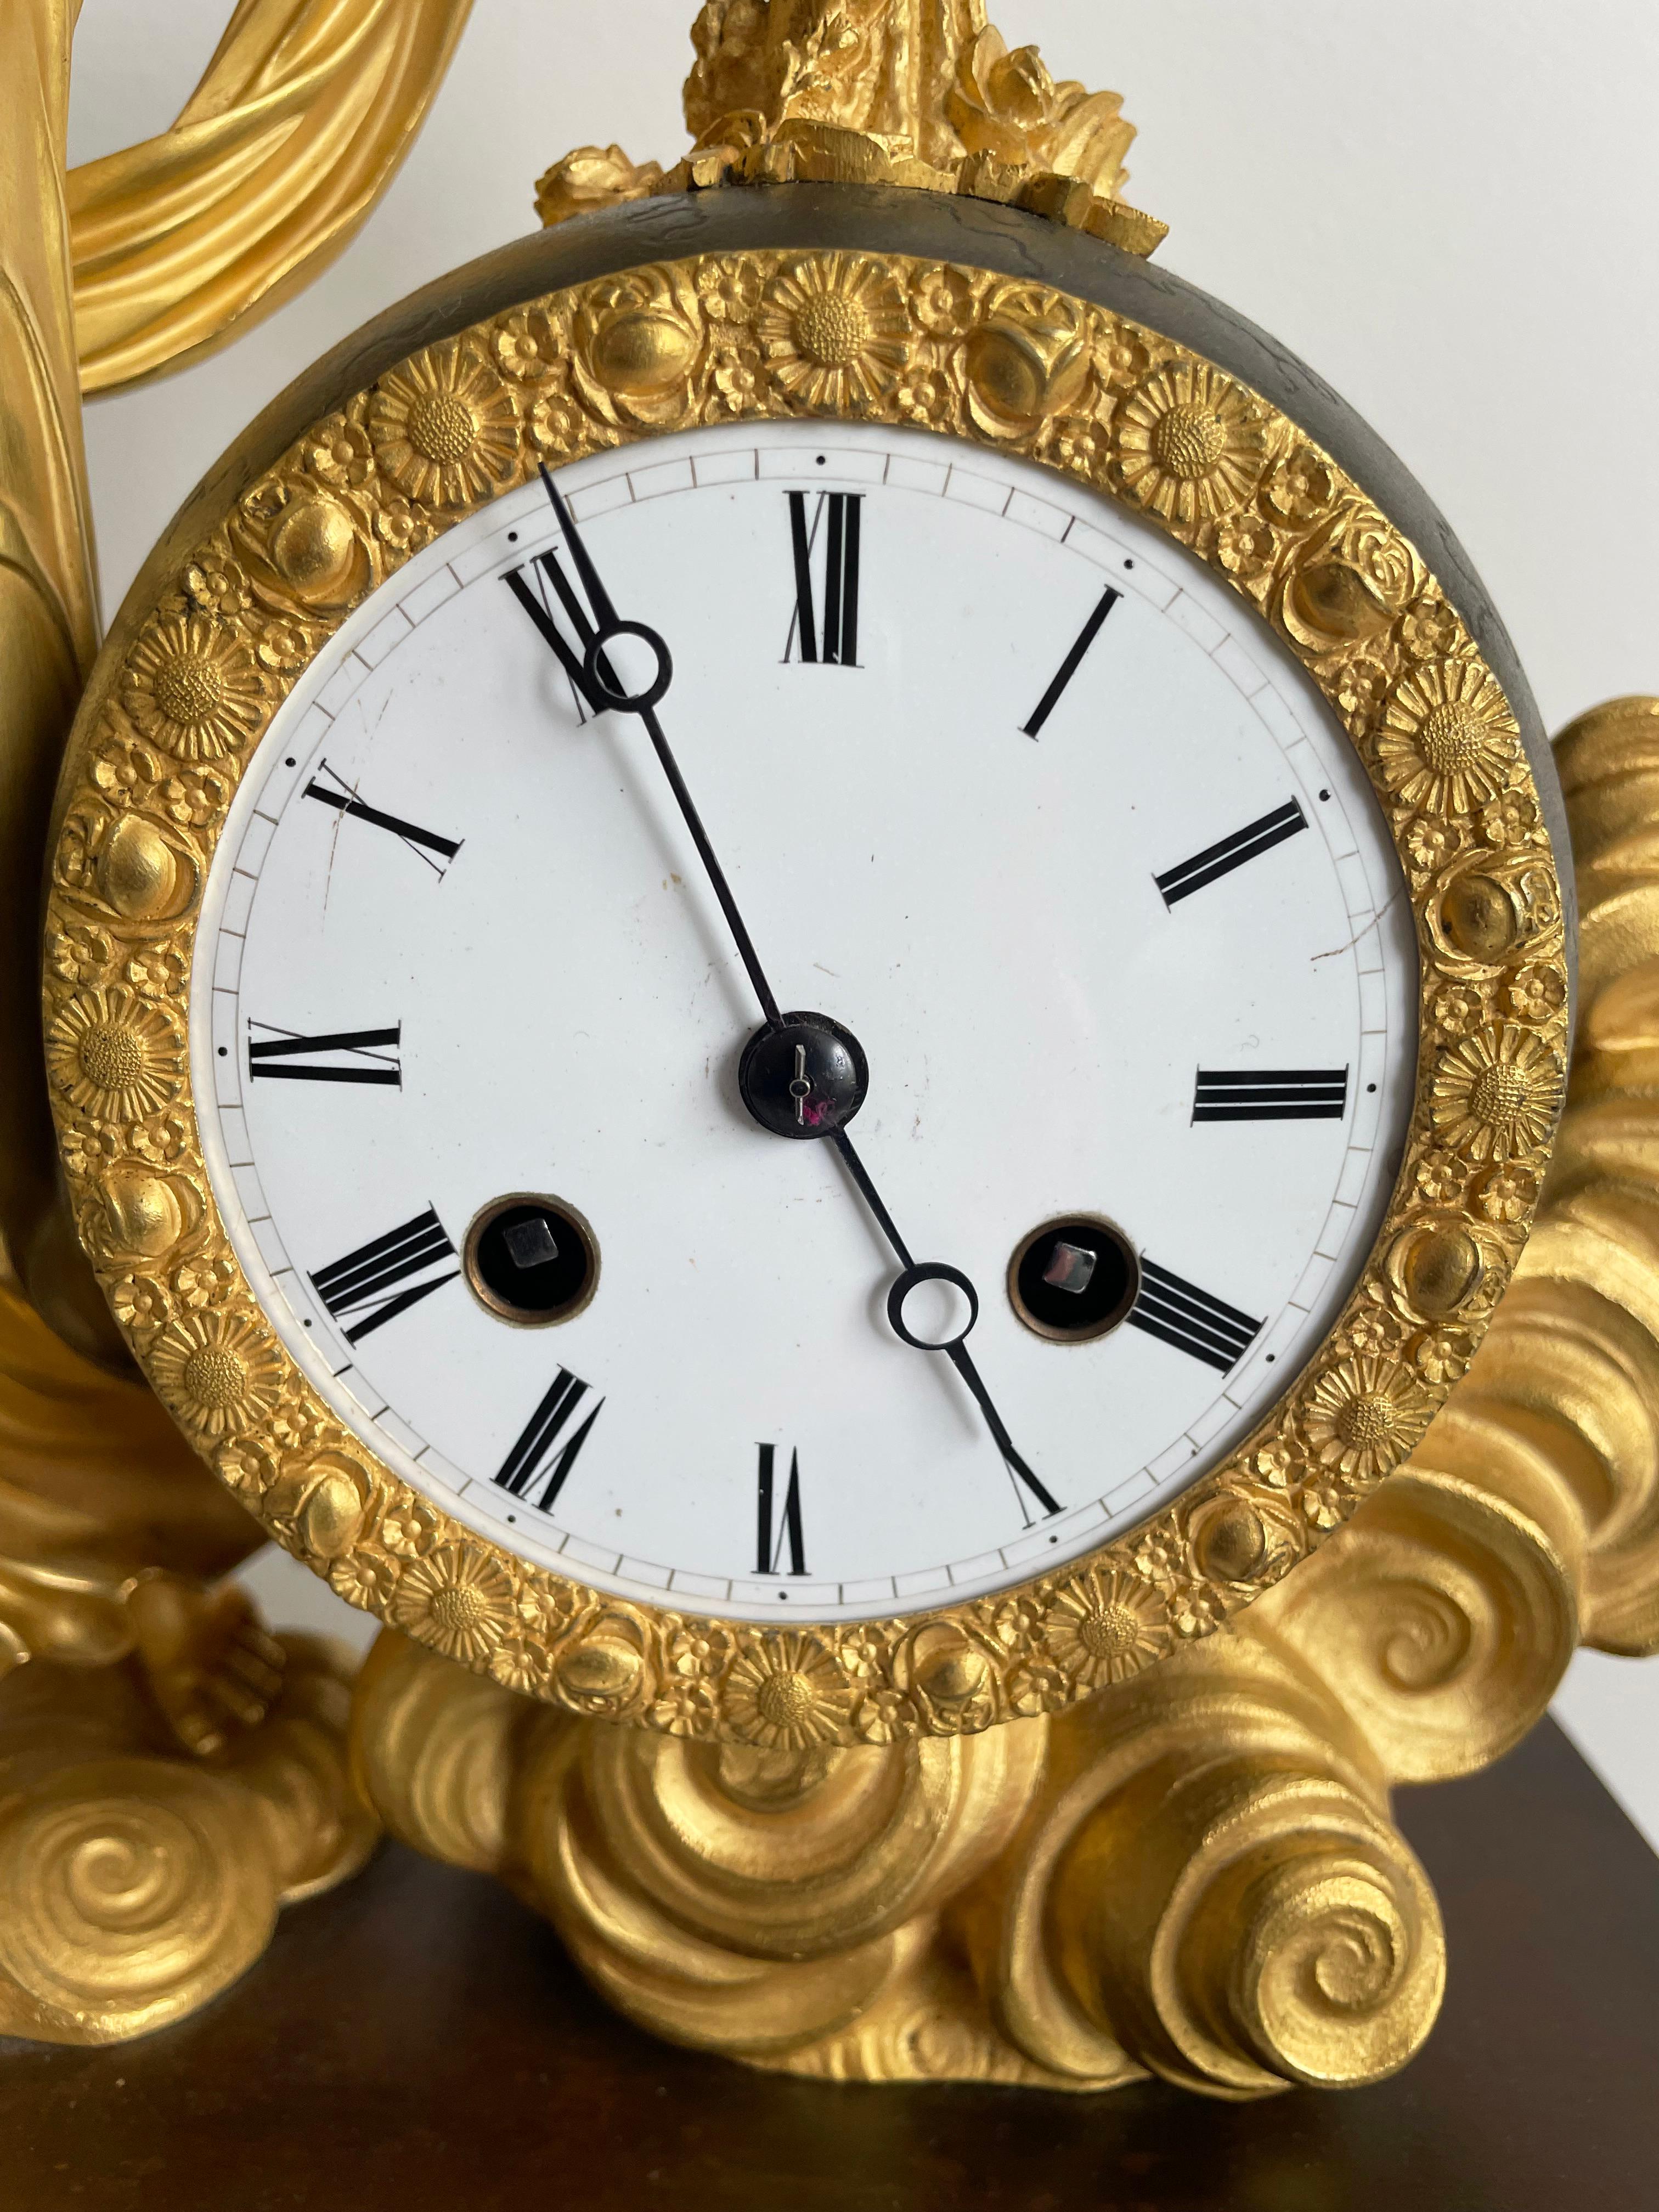 French Empire table clock by Cleret, Paris, movement by Pierre-César Honoré Pons.  The case in gilded and patinated bronze, circa 1825.

The bronze base is decorated with a broad floral frieze with a central urn and two doves above a gilt floral